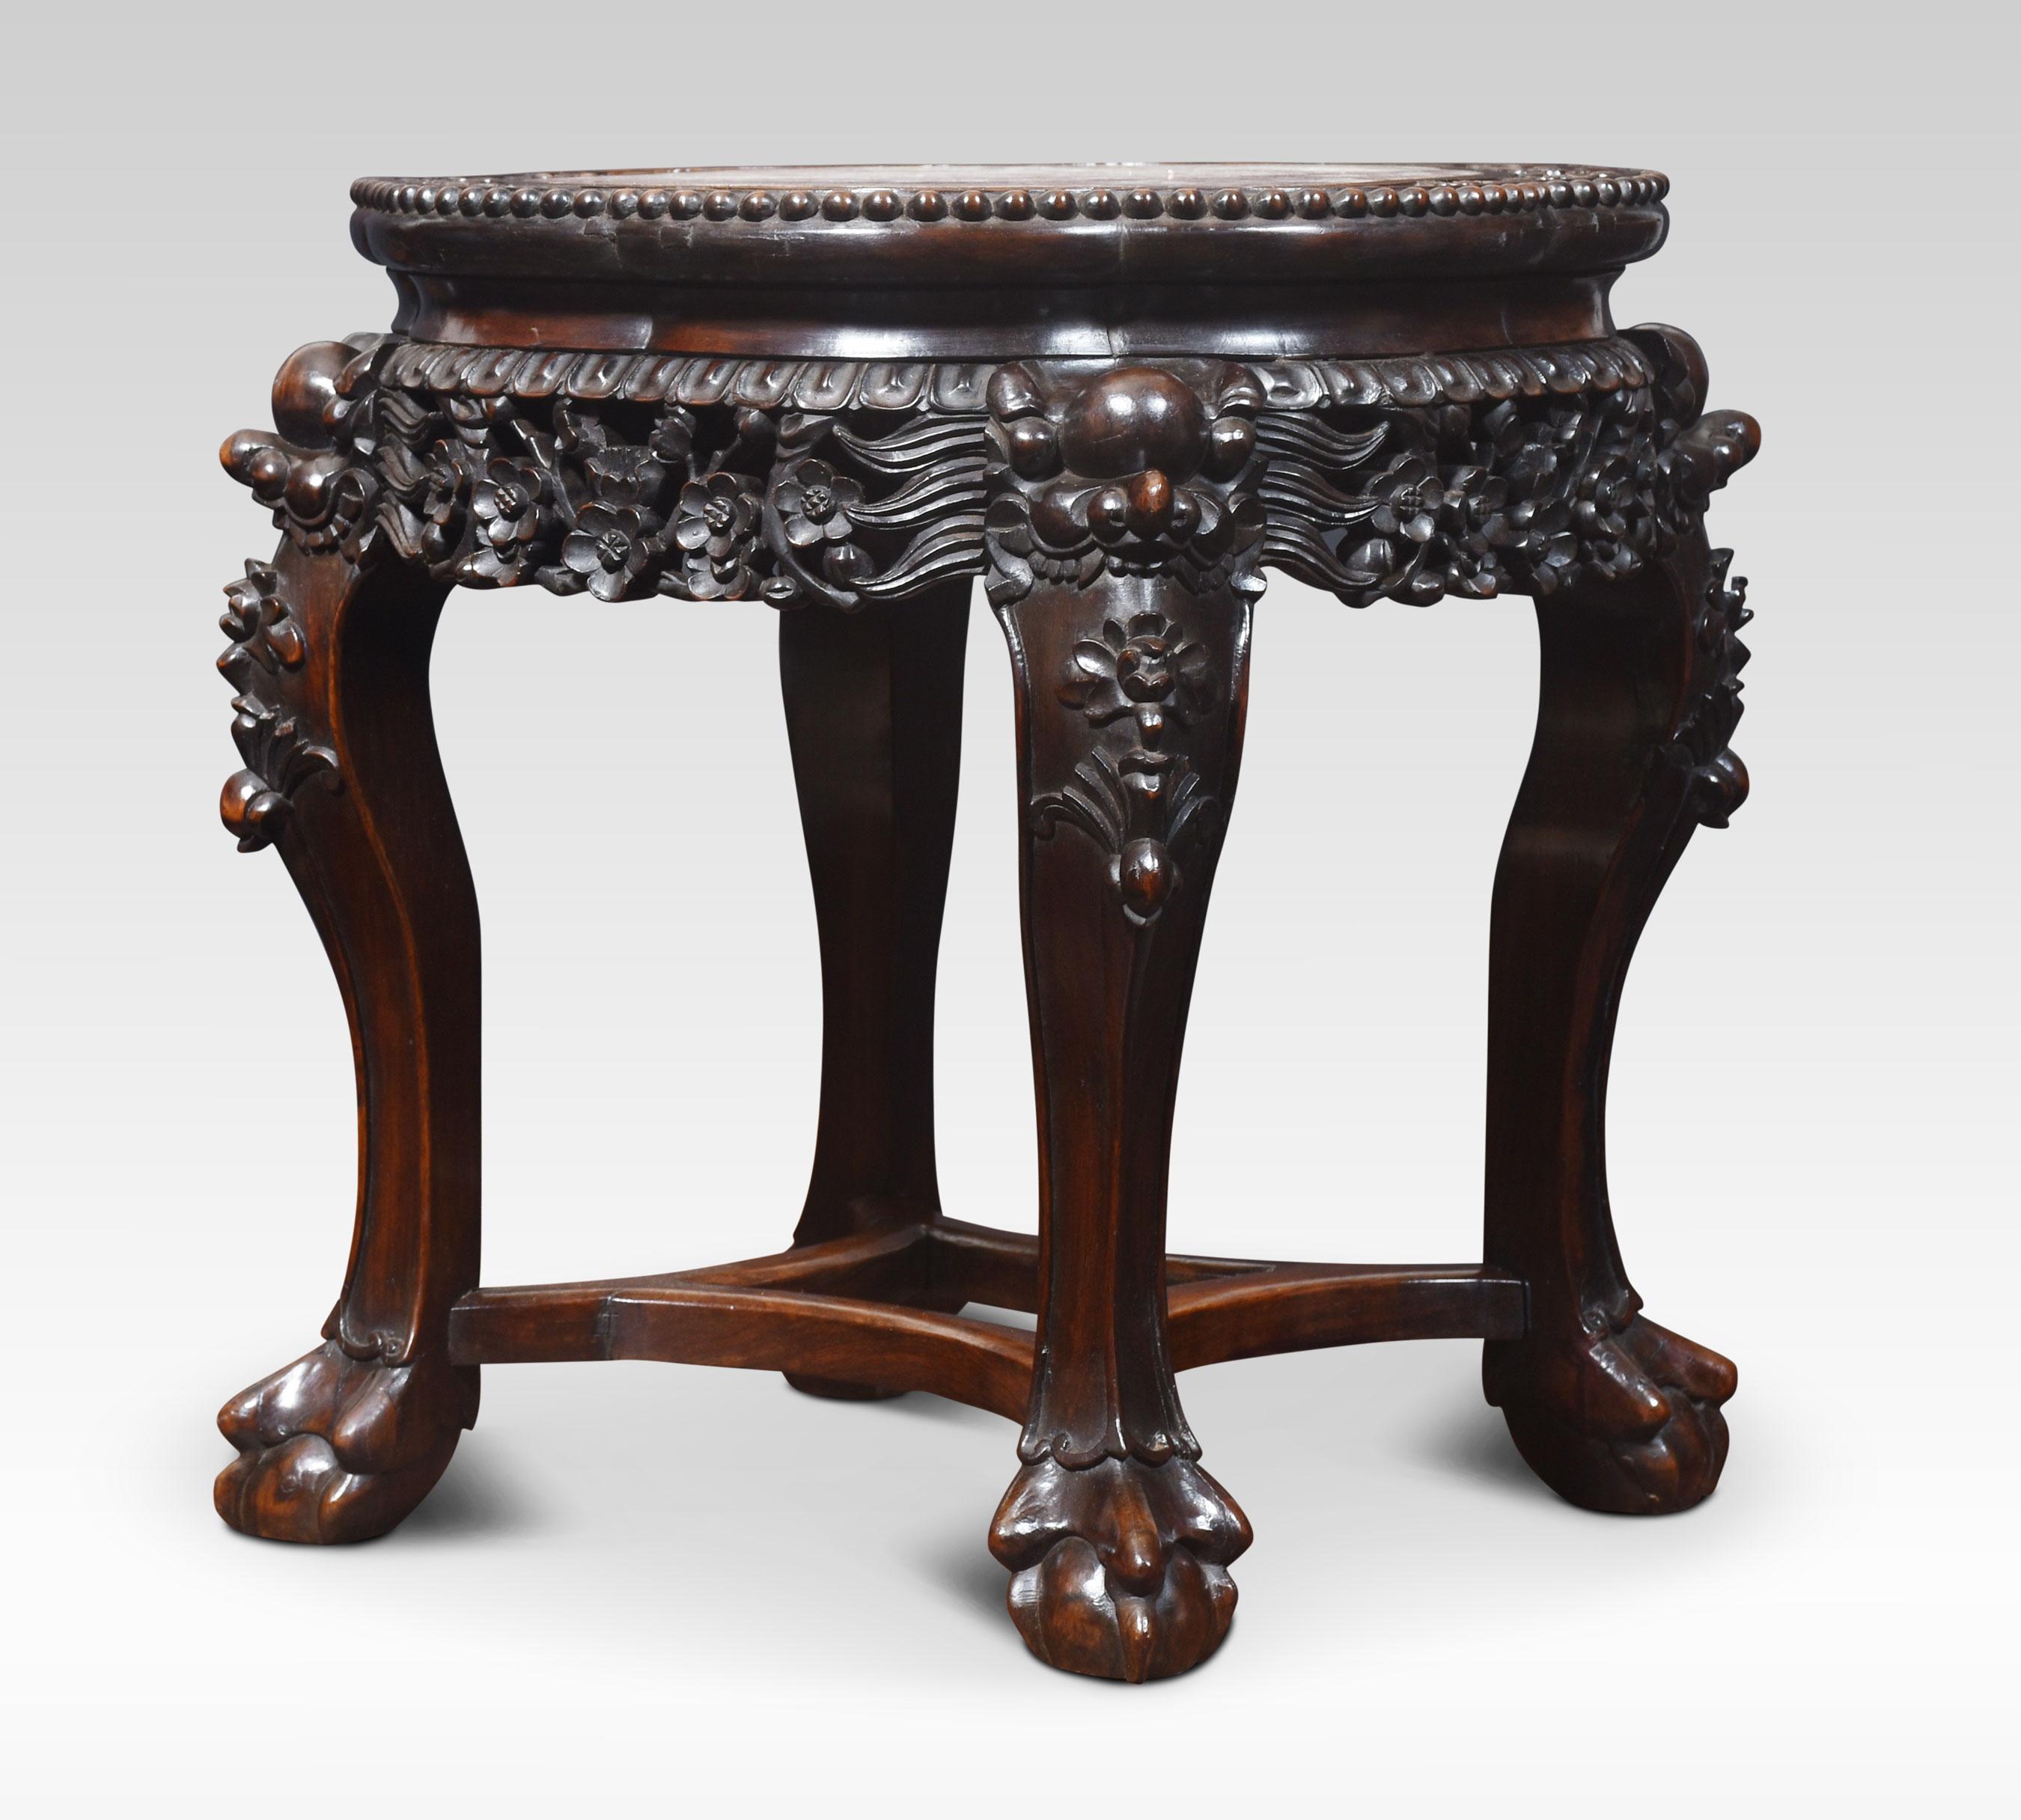 19th-century Chinese vase stand / wine table, the shaped top with inset marble, to the ornate carved pierced freeze. raised up on four shaped legs terminating in ball and claw feet, united by stretchers.
Dimensions
Height 18 Inches
Width 17